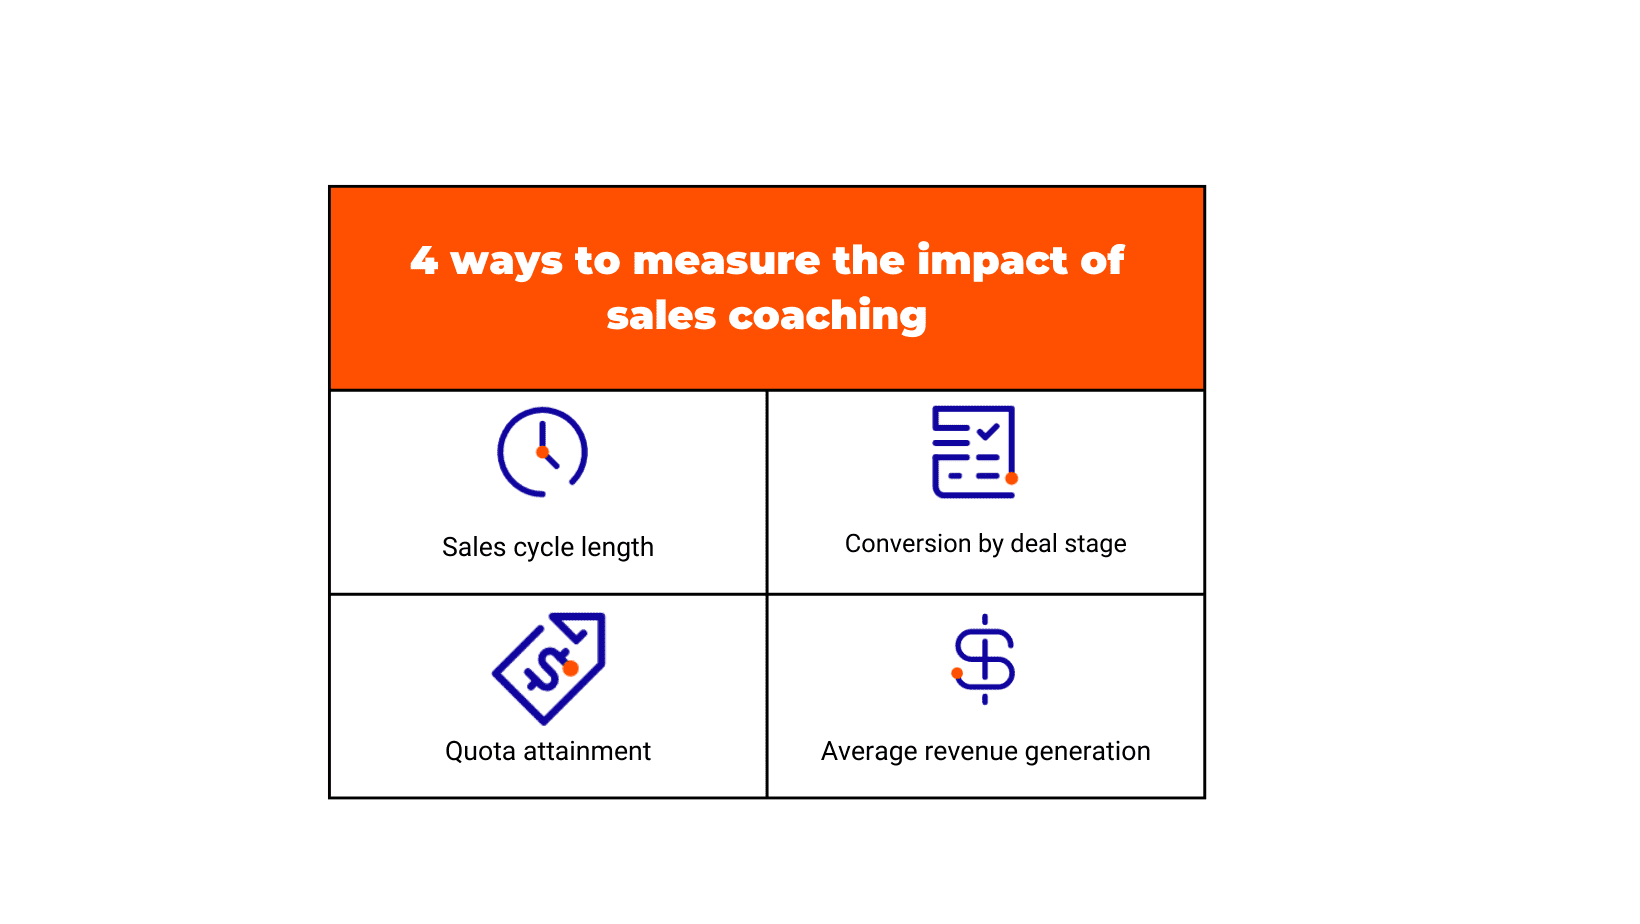 table showing 4 ways to measure sales coaching